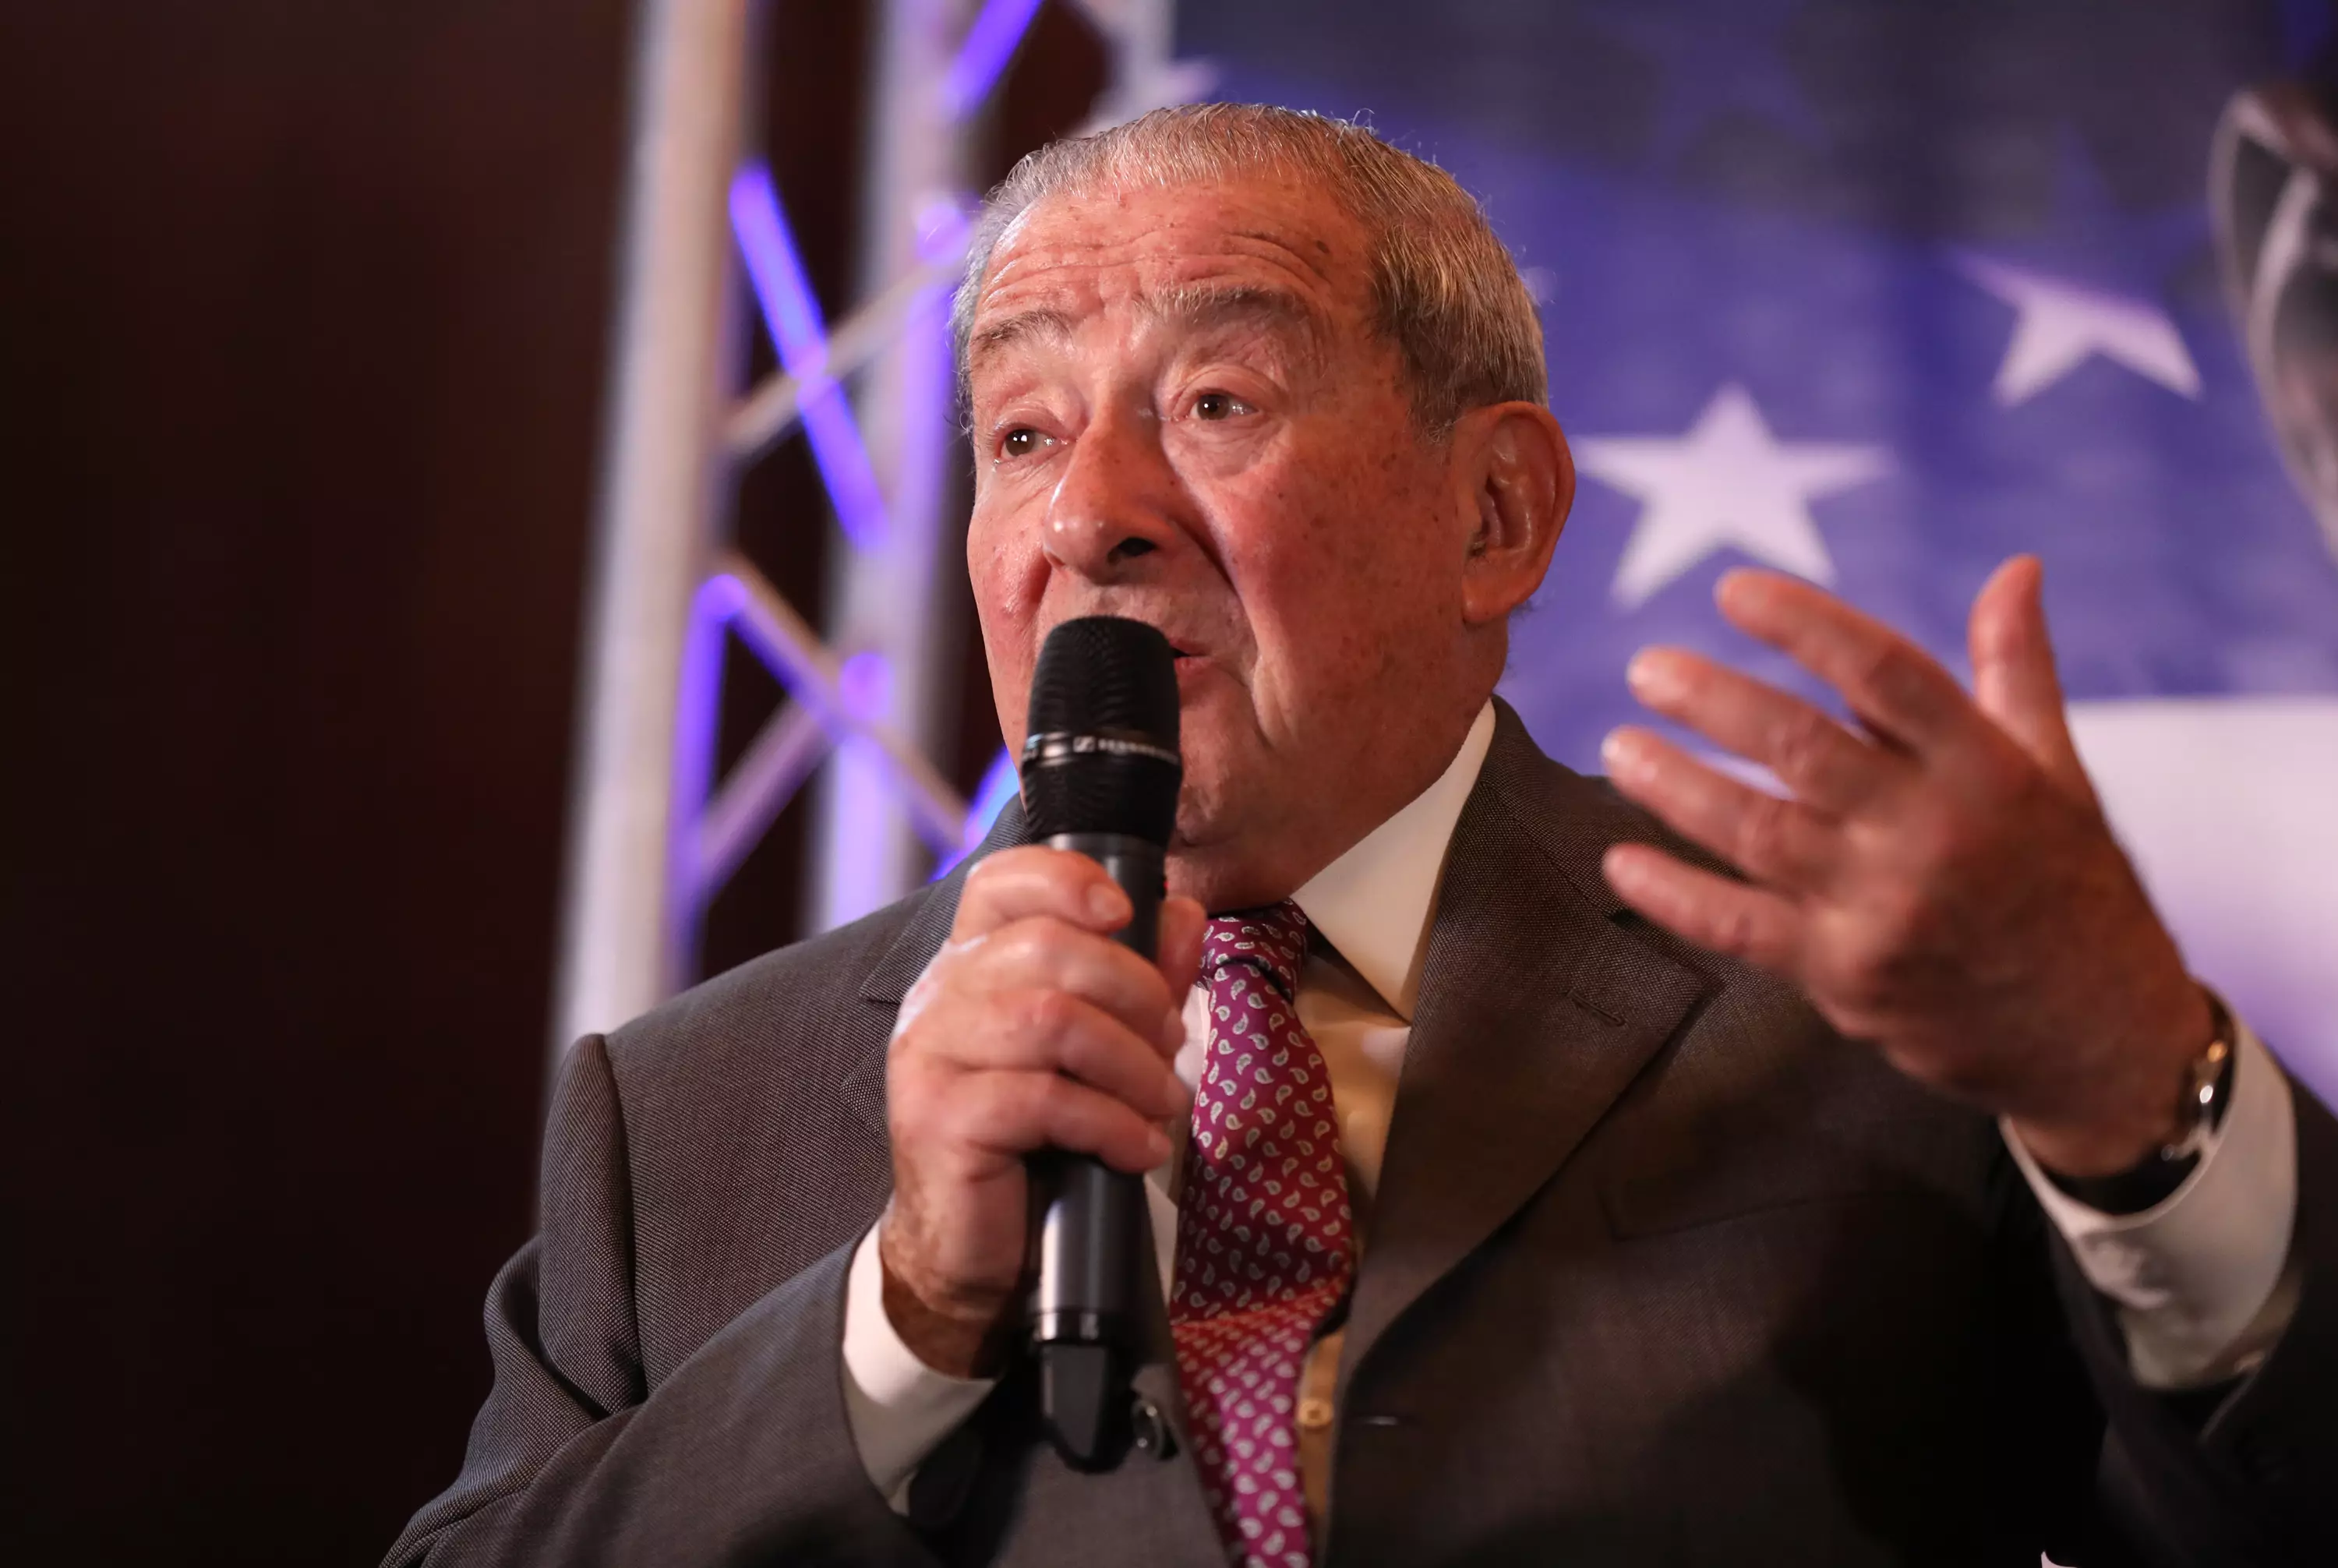 Bob Arum handles Tyson Fury's promotion in the US and has been critical of Eddie Hearn